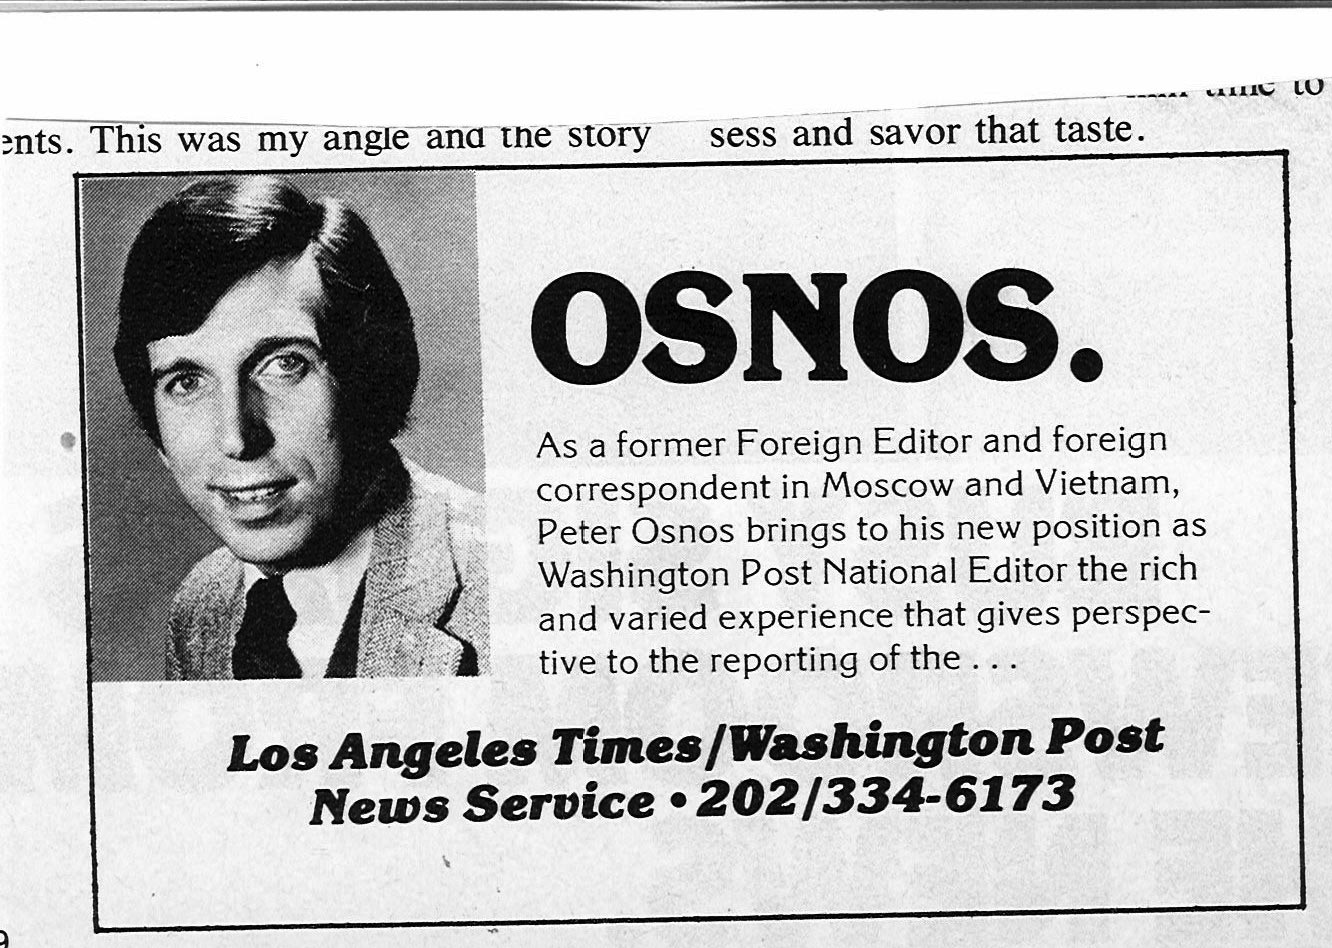 Washington Post ad in Editor and Publisher